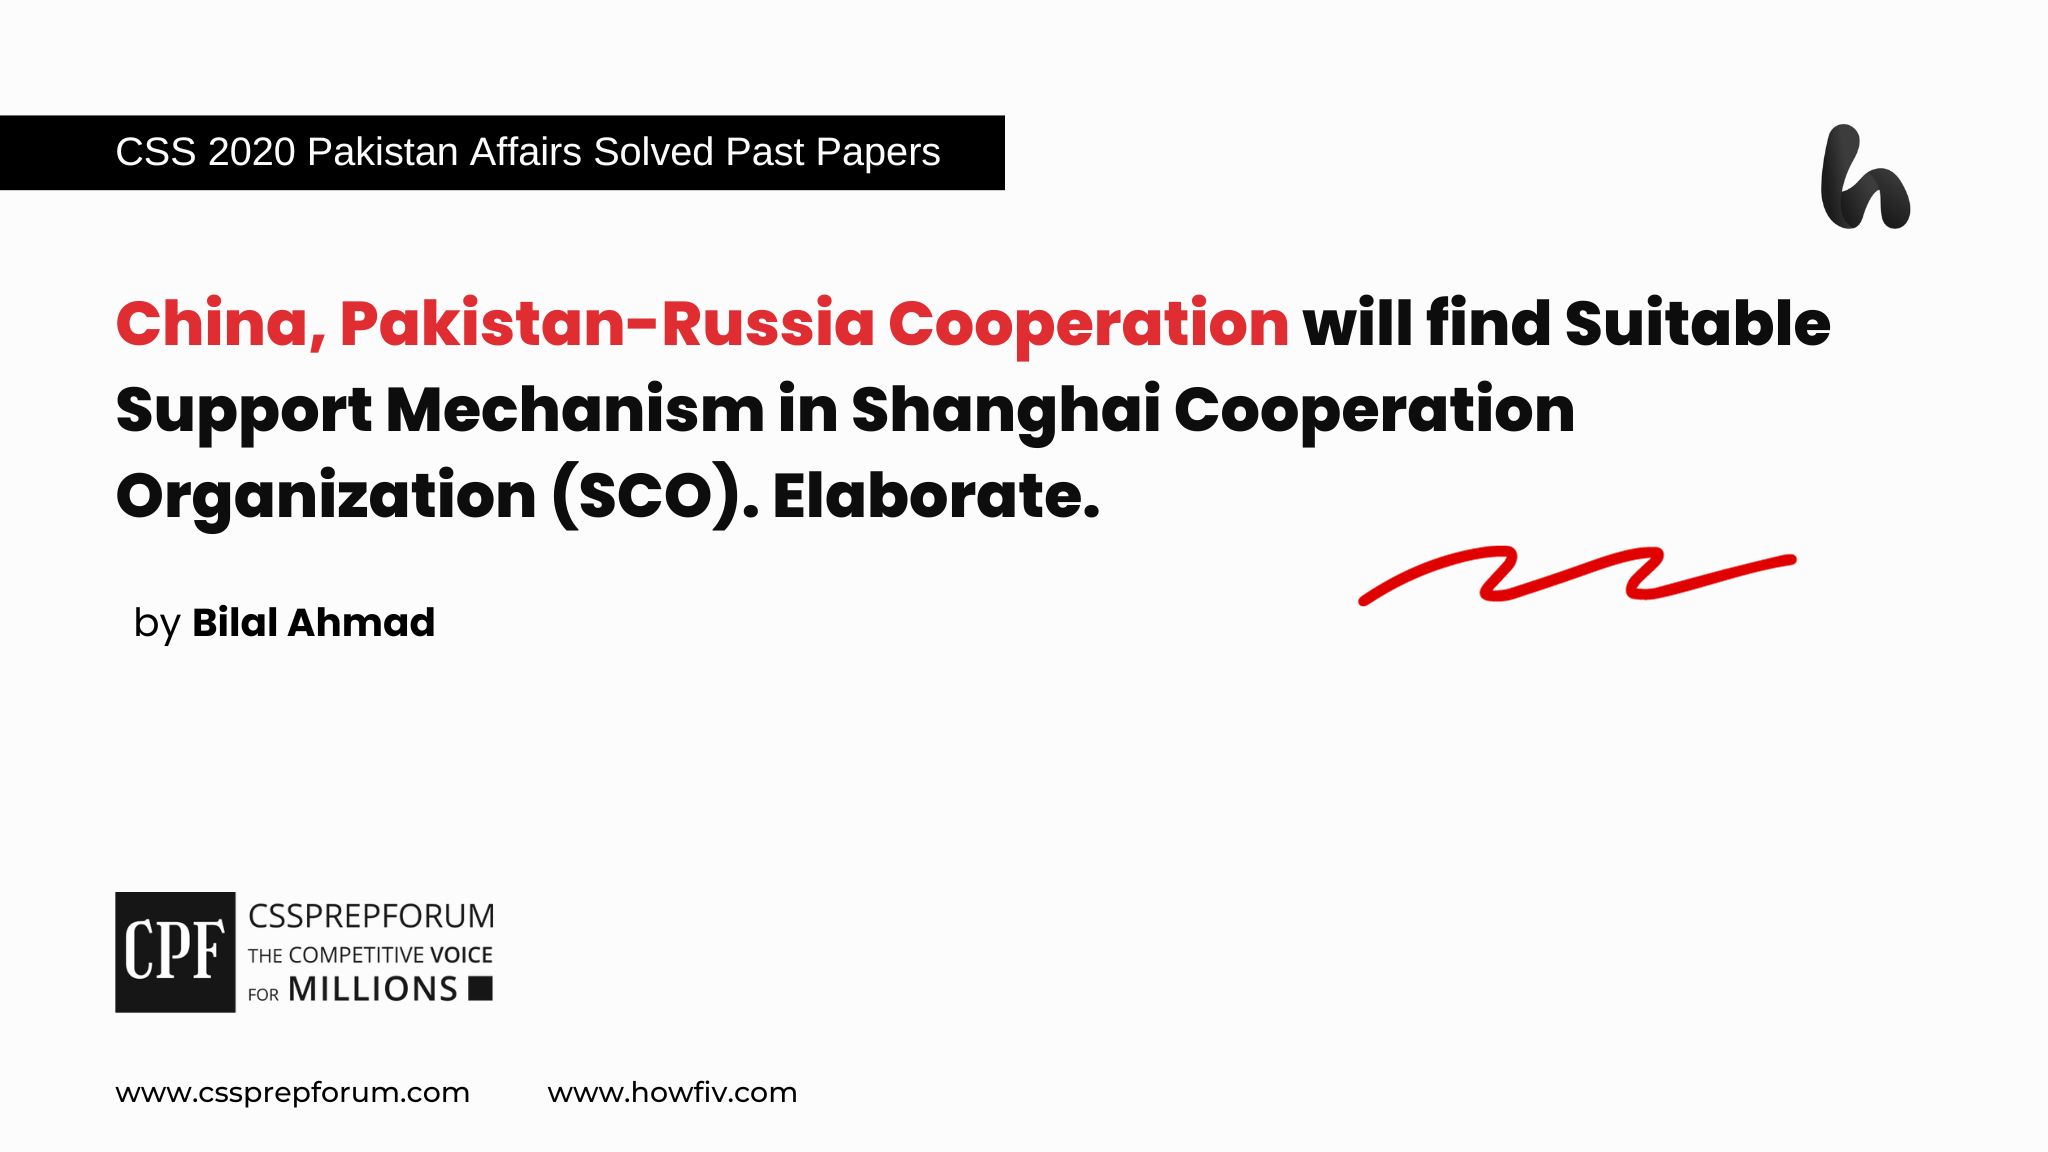 China, Pakistan-Russia Cooperation will find Suitable Support Mechanism in Shanghai Cooperation Organization (SCO). Elaborate.